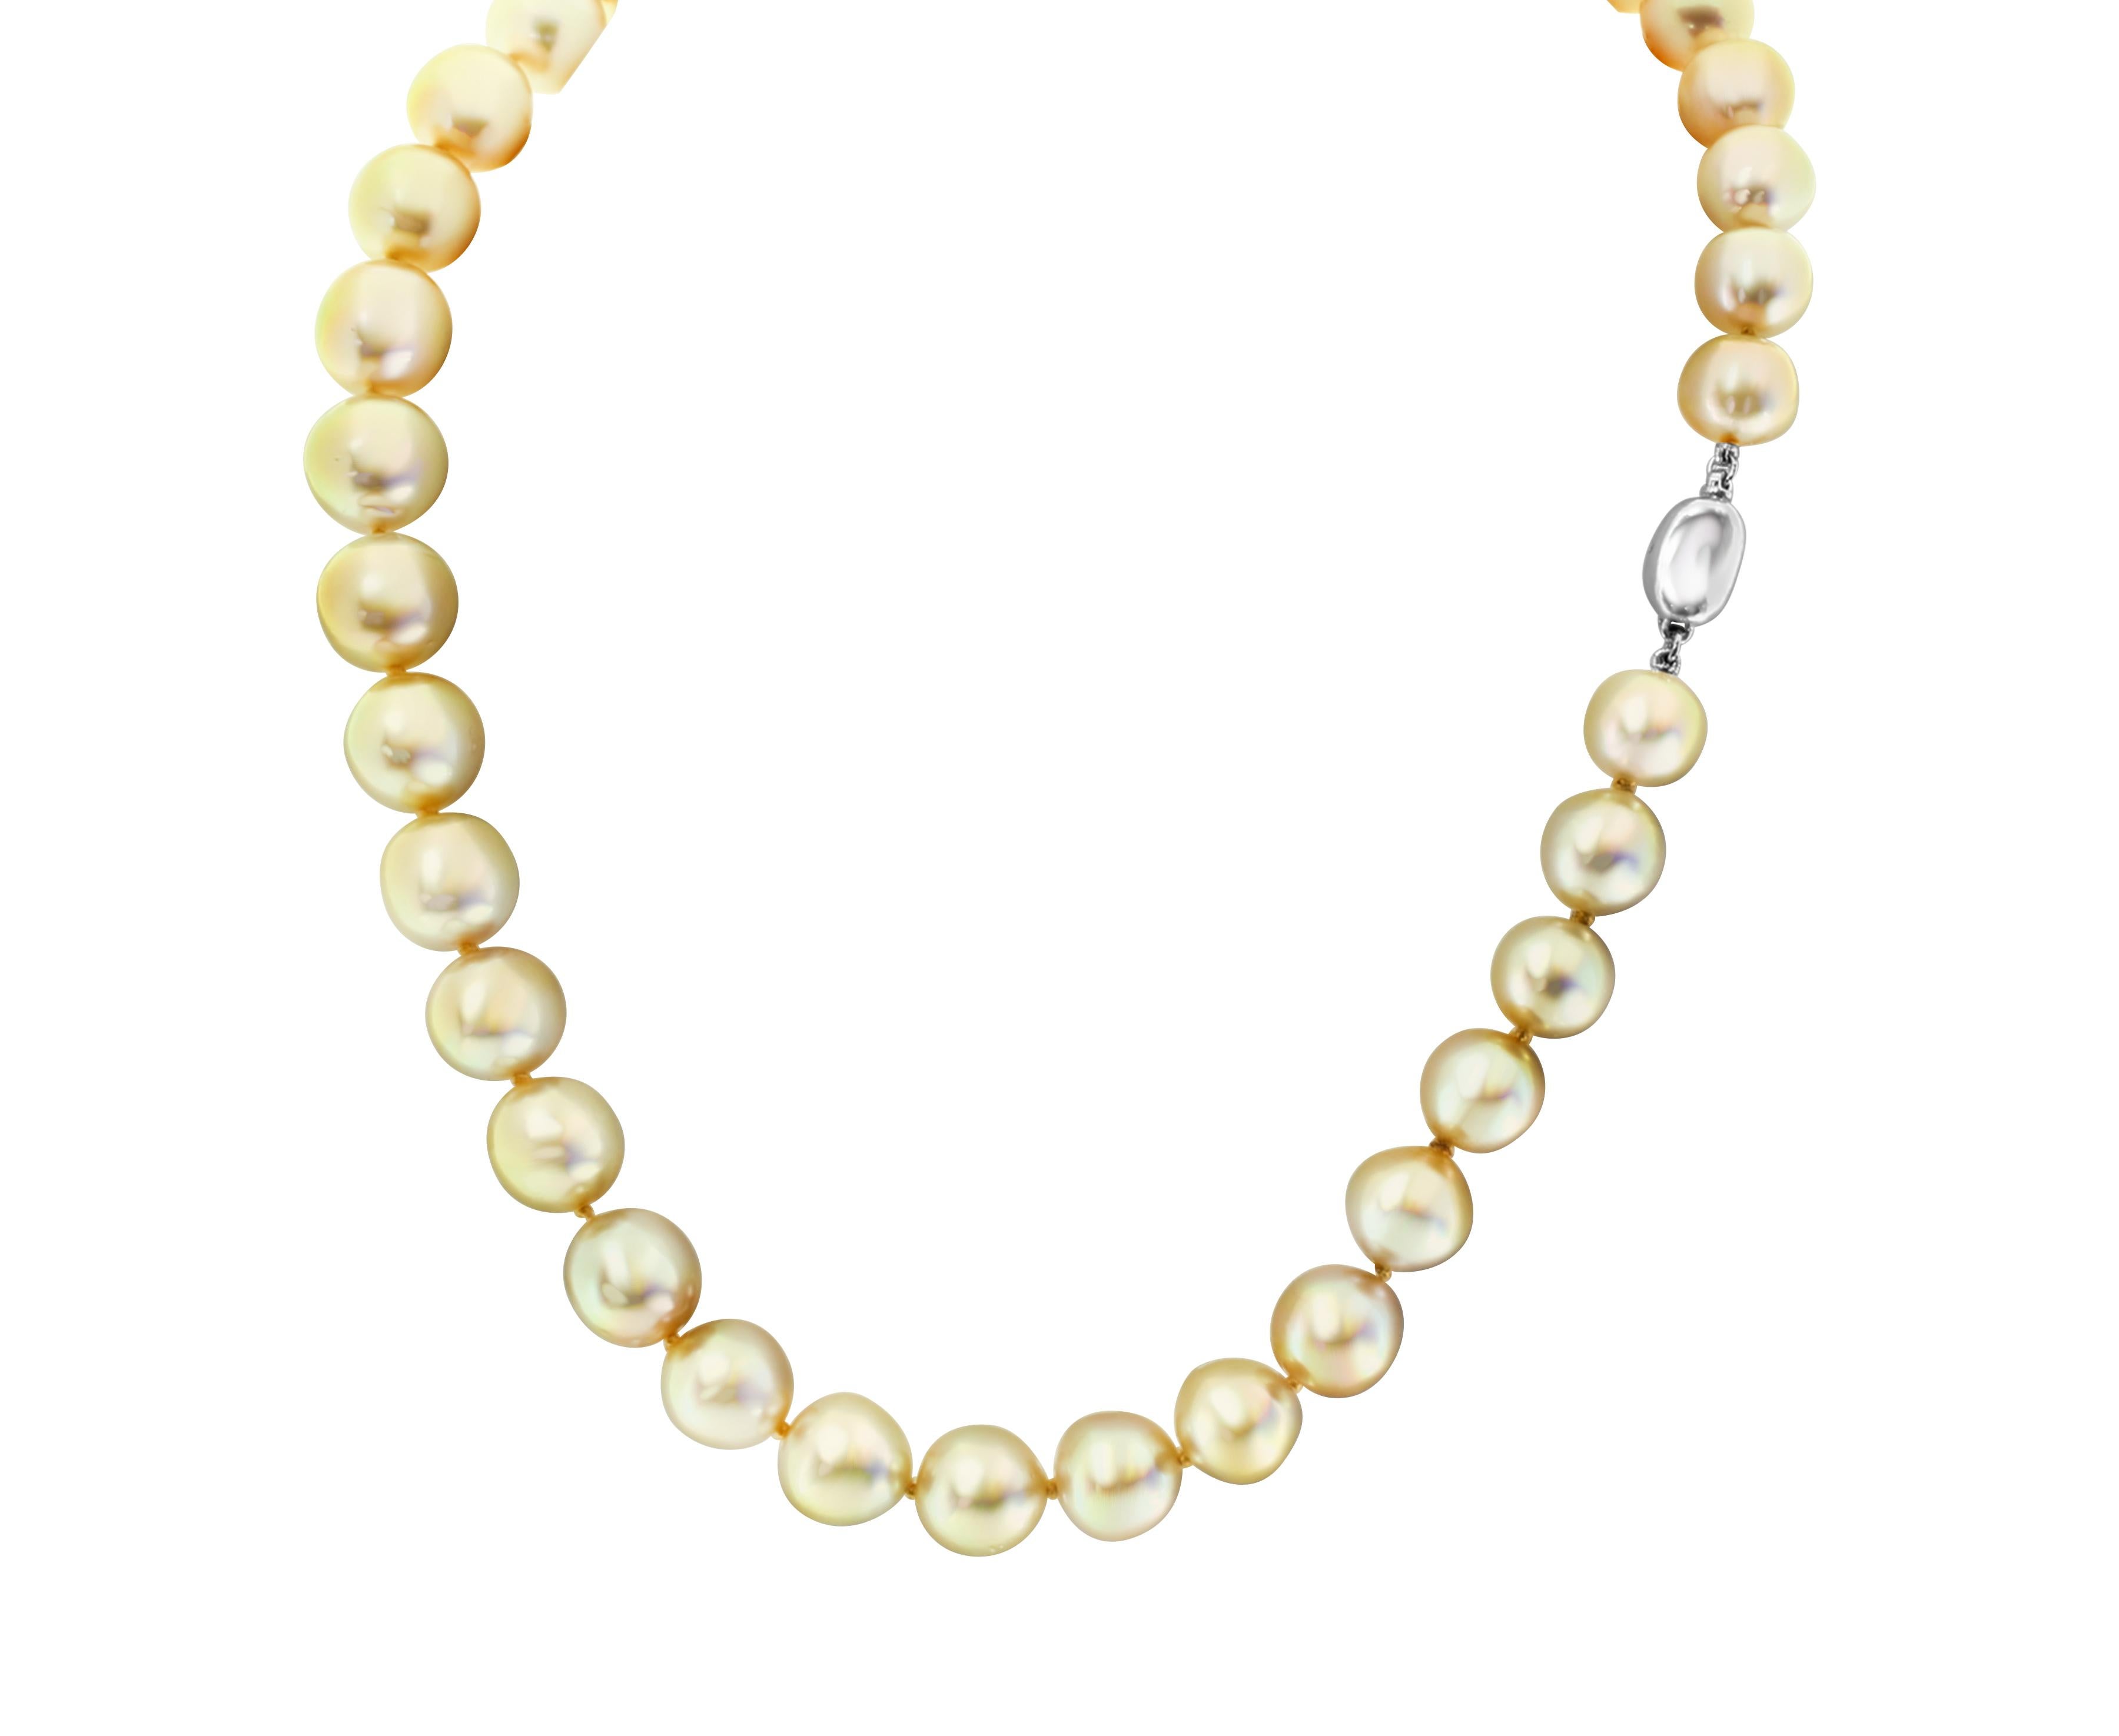 This 18 inches necklace features South Sea Golden cultured pearls that are ever so slightly off-round. The pearls measure 10x12.8mm. The necklace is finished with a silver tone clasp. The single-knotted strand is hand-strung on pure silk cord,